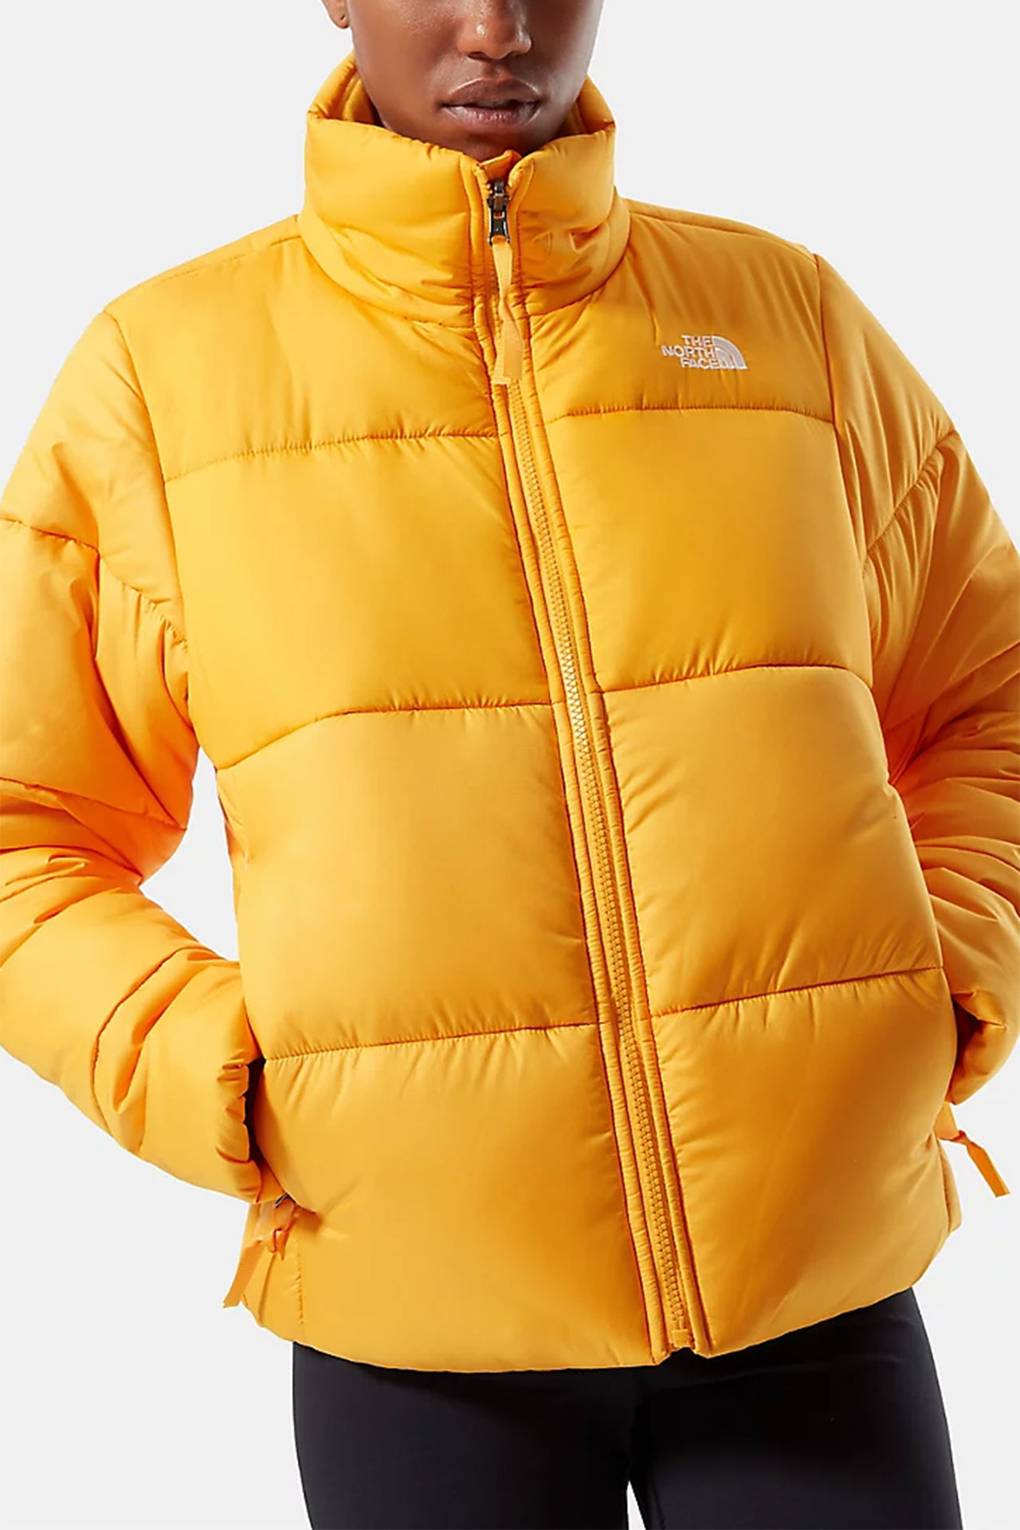 best womens north face jacket